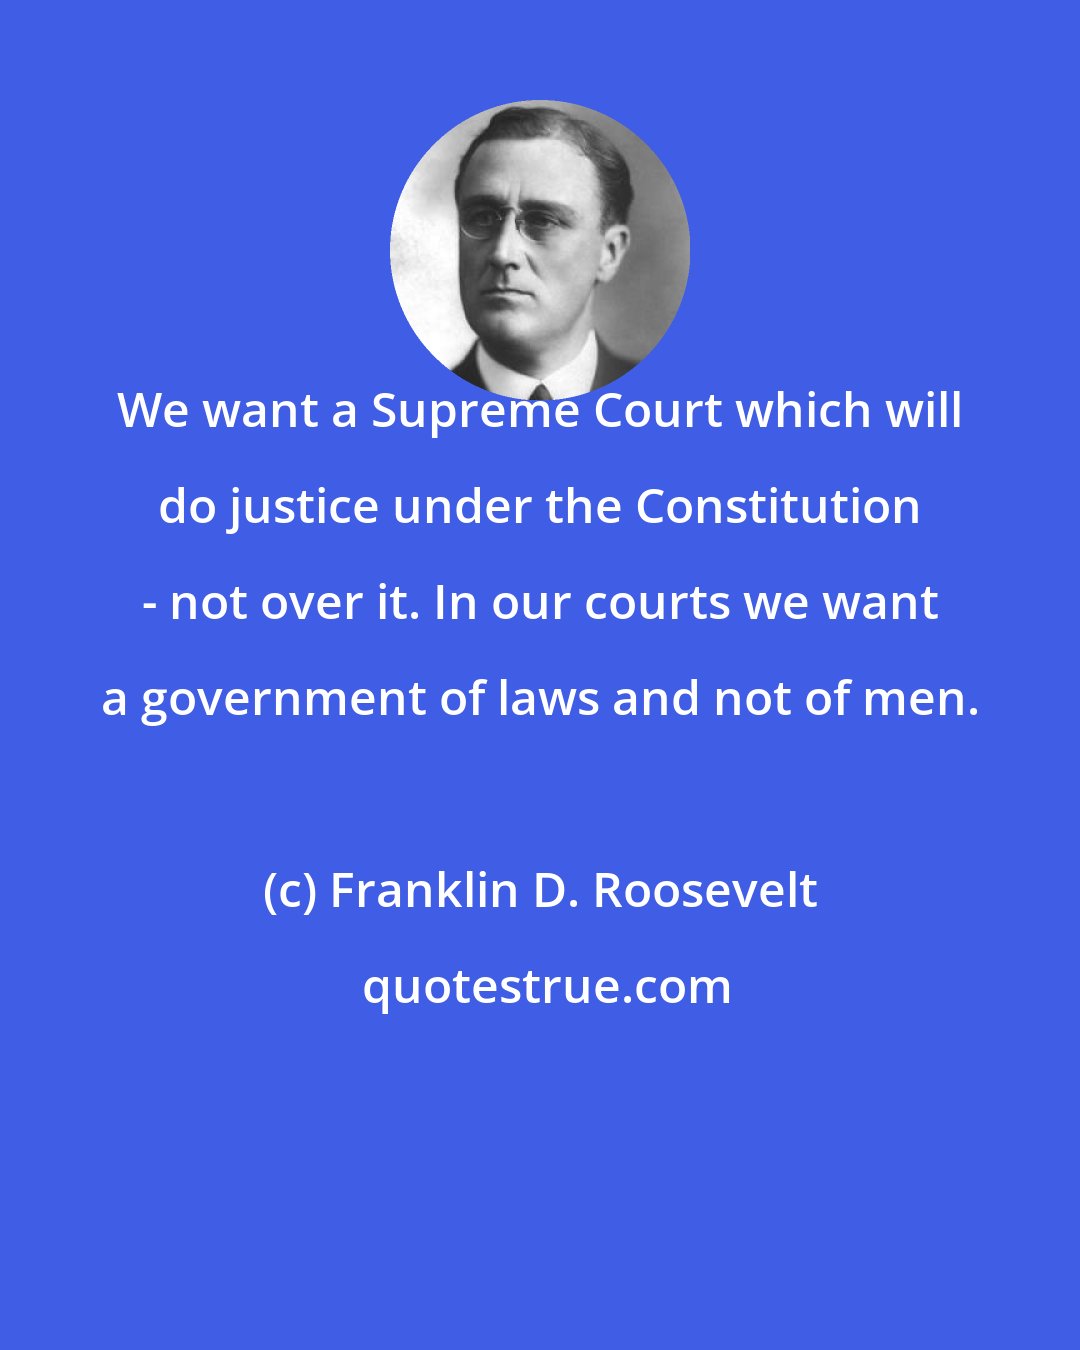 Franklin D. Roosevelt: We want a Supreme Court which will do justice under the Constitution - not over it. In our courts we want a government of laws and not of men.